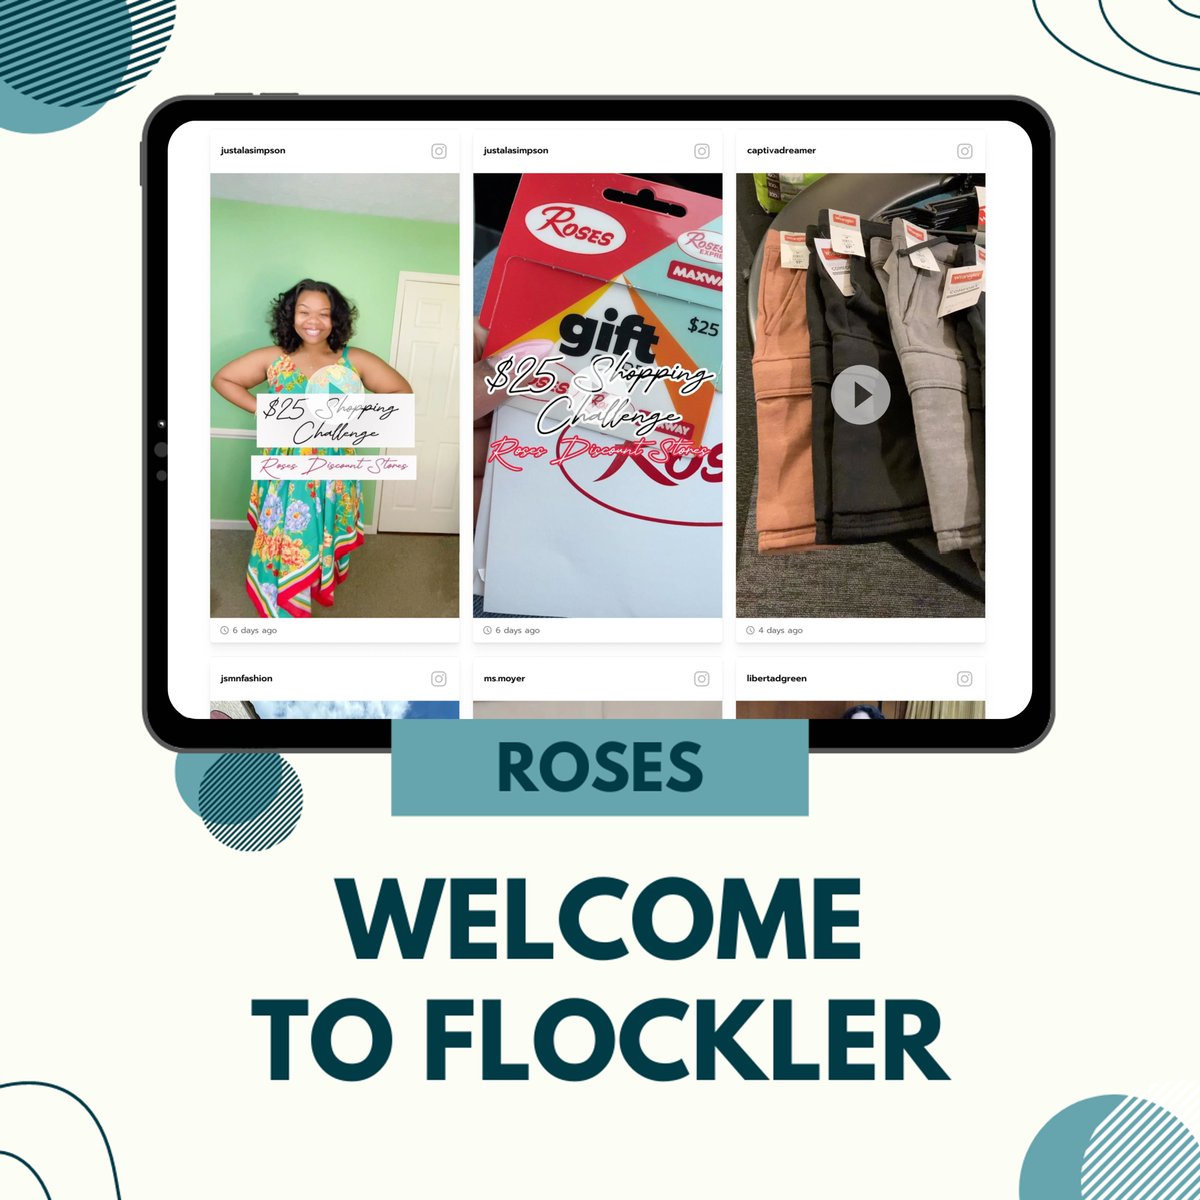 🎉 Welcome to our Flockler family 🎉

Roses is one of the retailers asking customers to show how they are creating an outfit or designing a room with Roses' products 💎

#flockler #ugc #socialproof #customerreviews #digitalmarketing #socialmediamarketing #retailmarketing